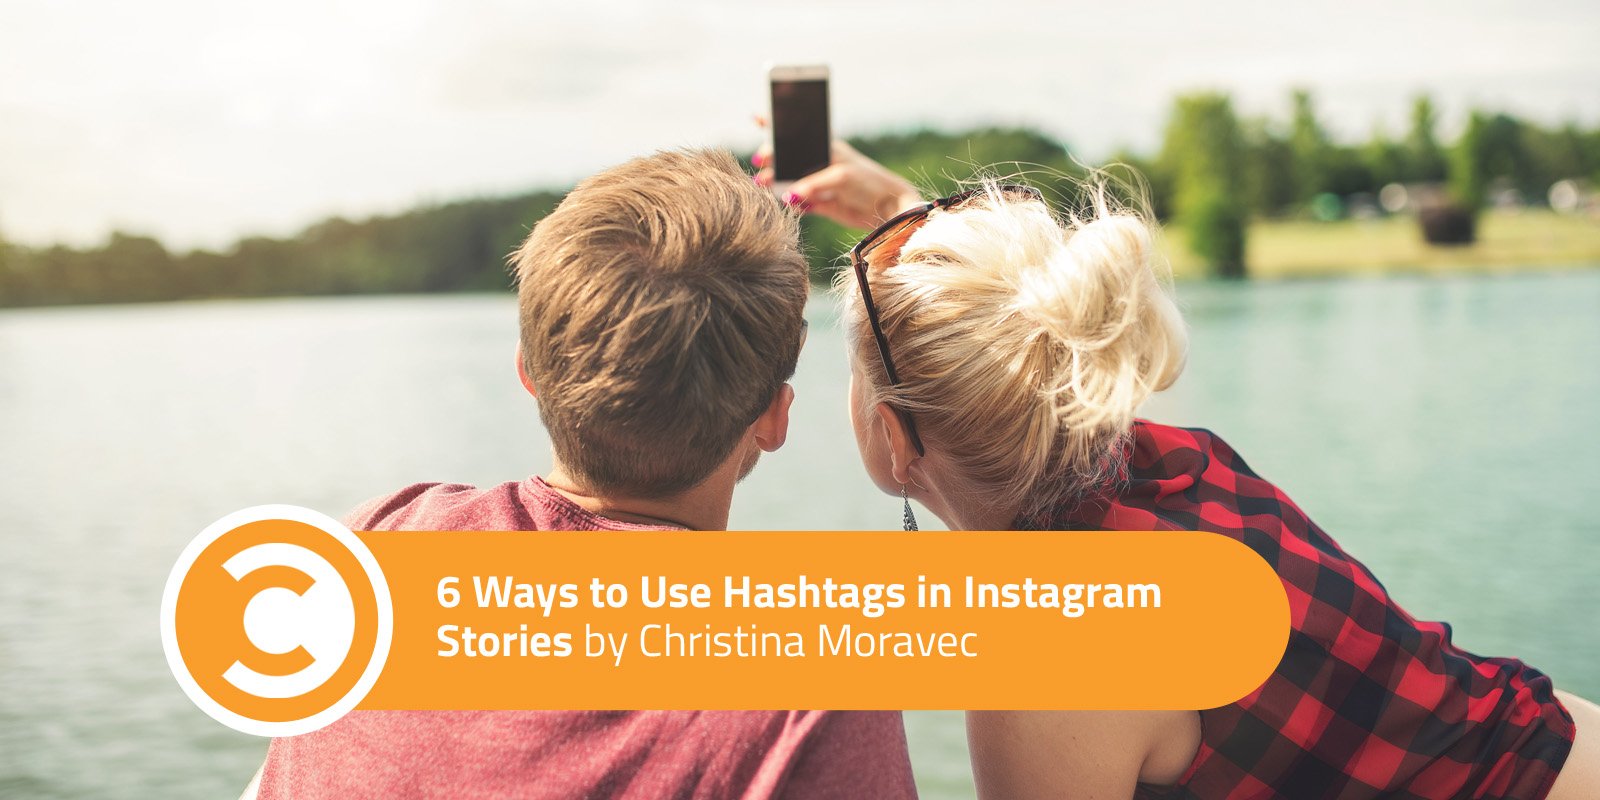 6 Ways to Use Hashtags in Instagram Stories